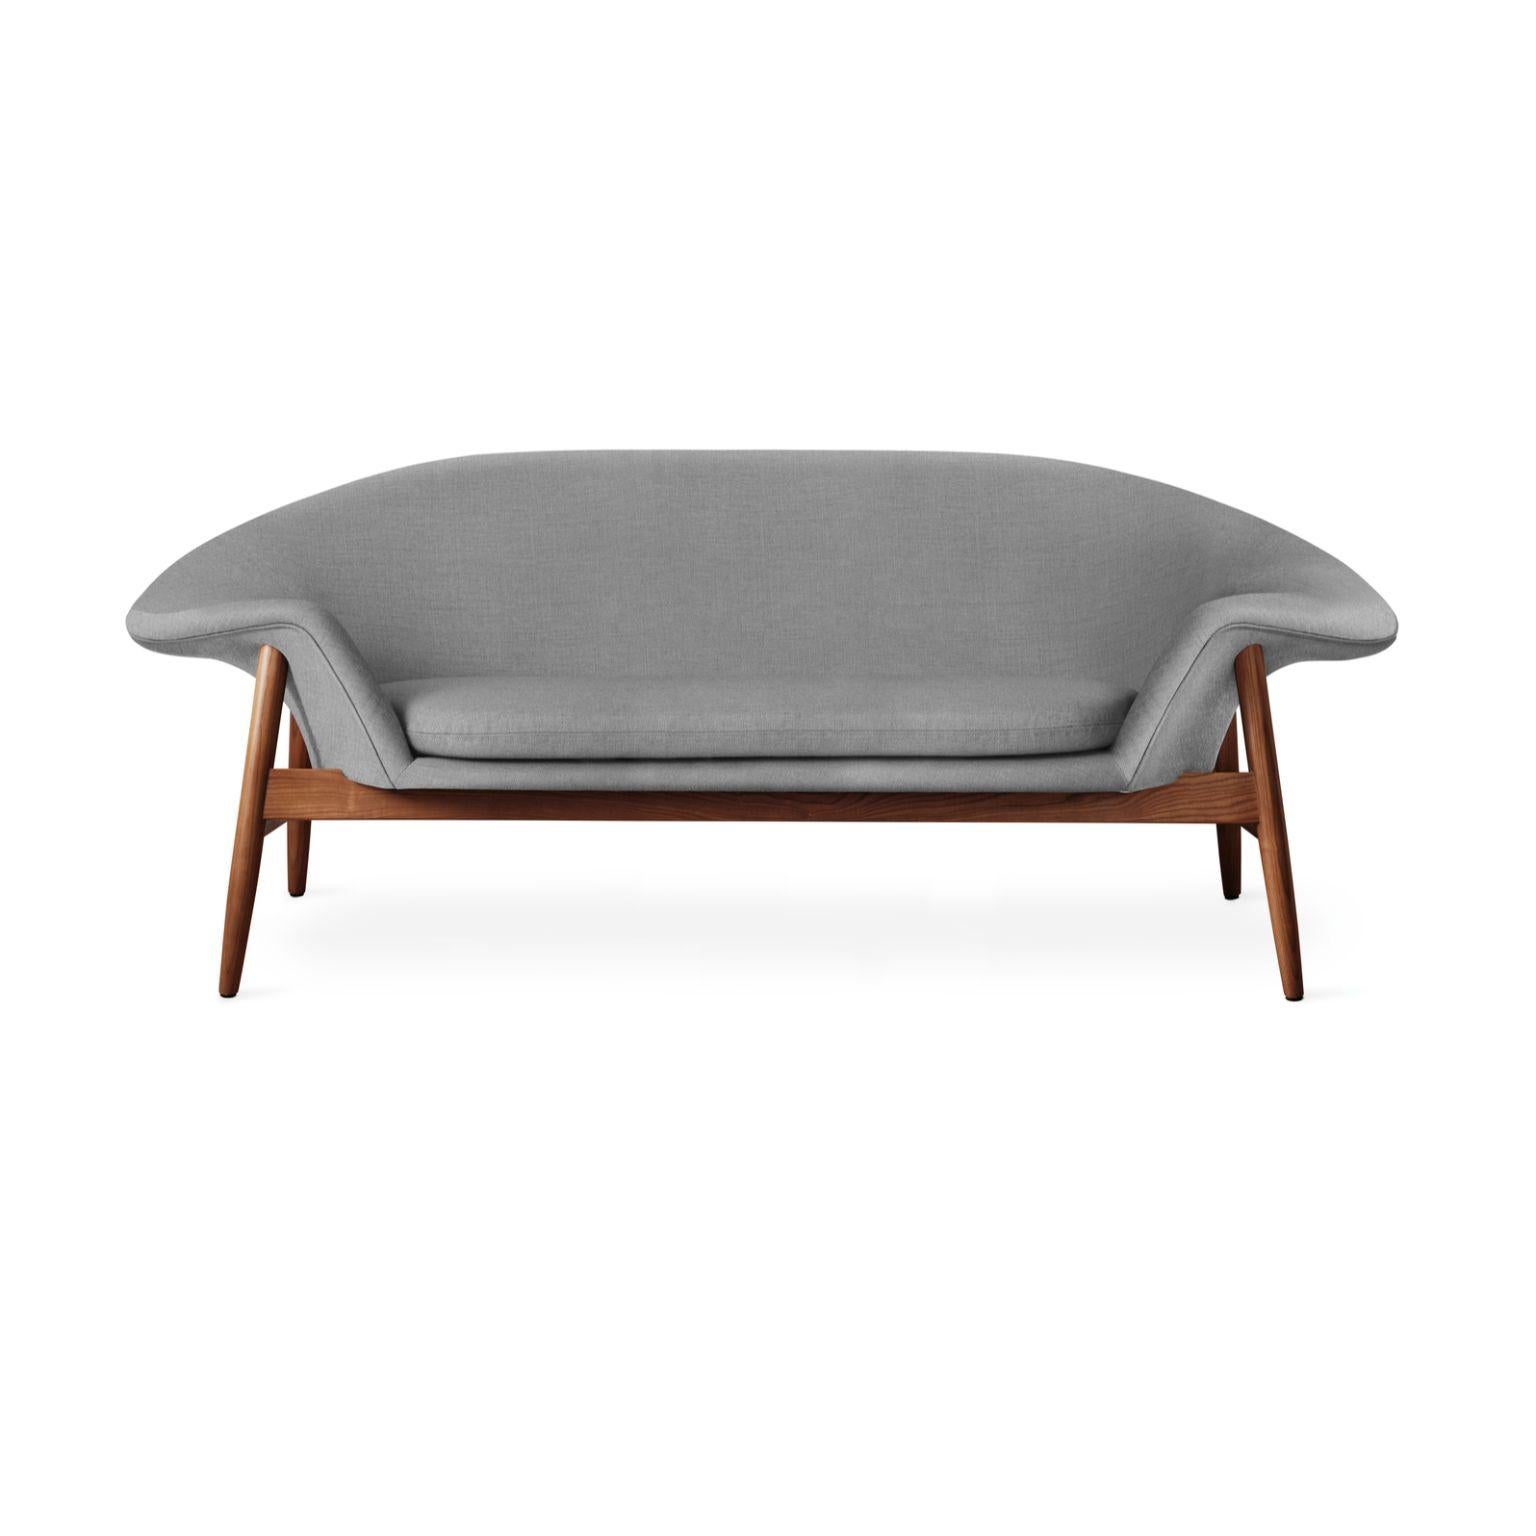 Fried egg sofa grey Melange by Warm Nordic
Dimensions: D186 x W68 x H 68 cm
Material: Textile upholstery, Solid oiled teak
Weight: 42 kg
Also available in different colours and finishes. 

Warm Nordic is an ambitious design brand anchored in